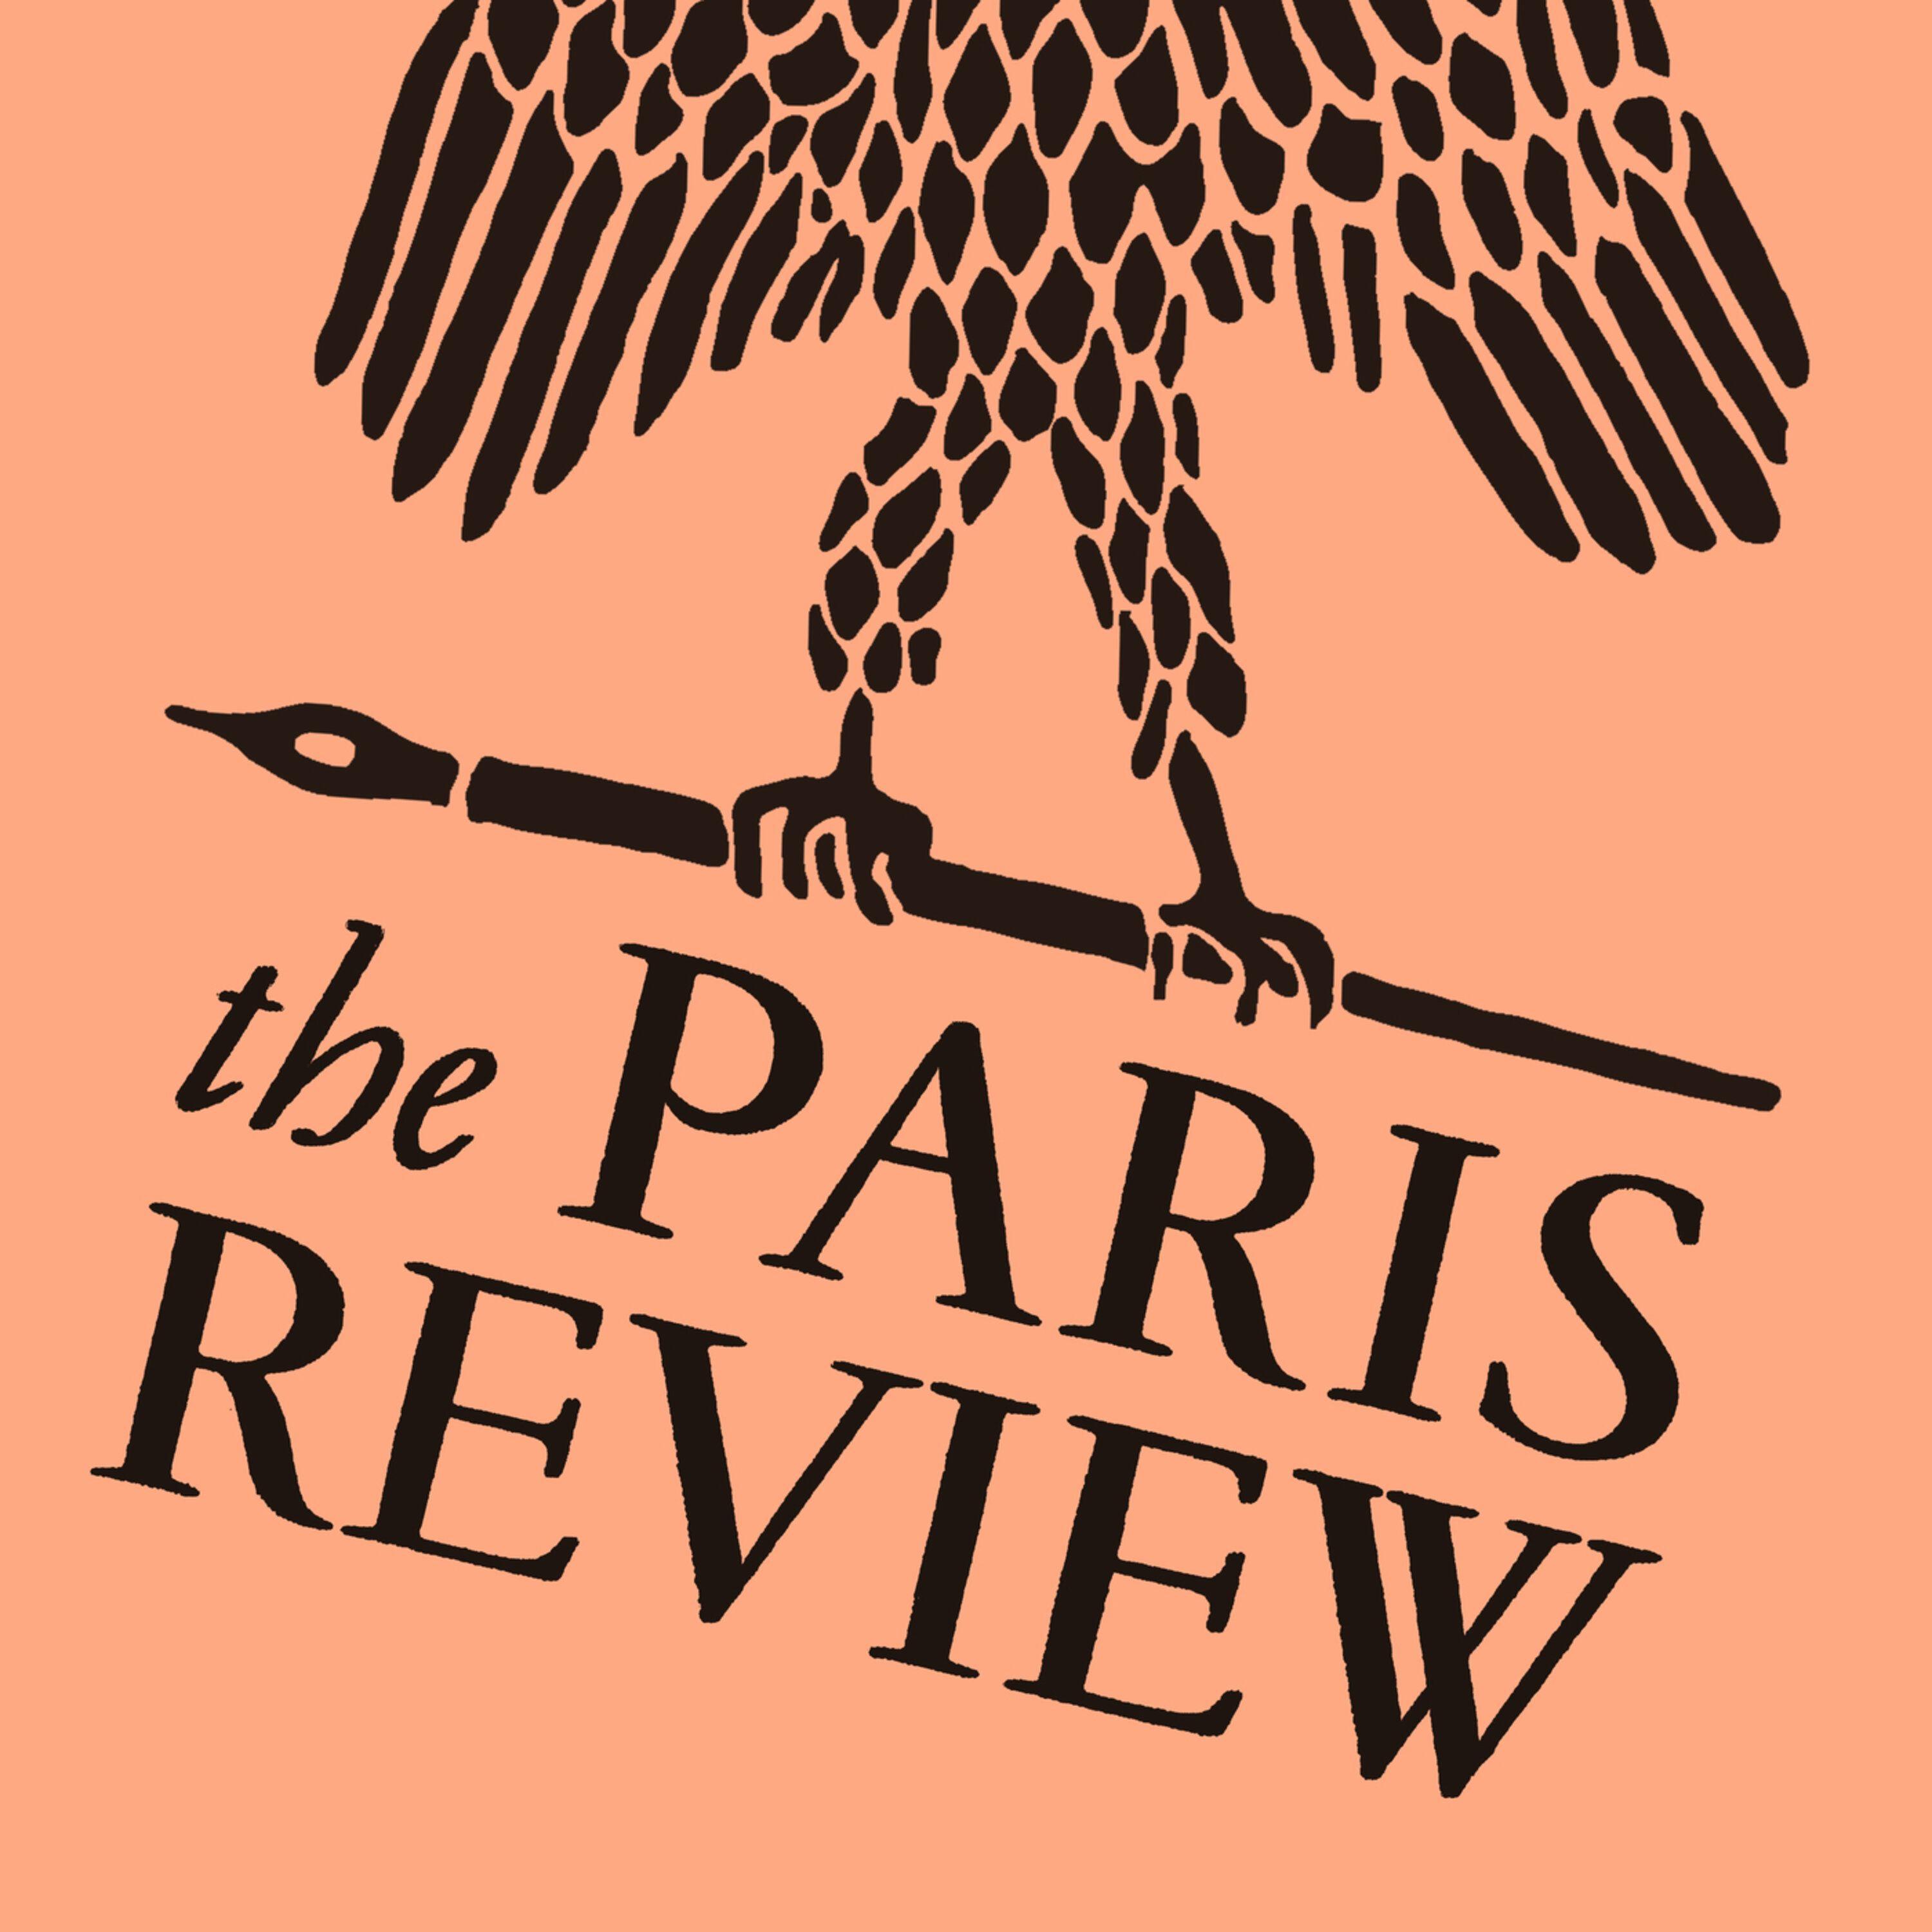 Thumbnail for "Coming soon: The Paris Review Podcast".